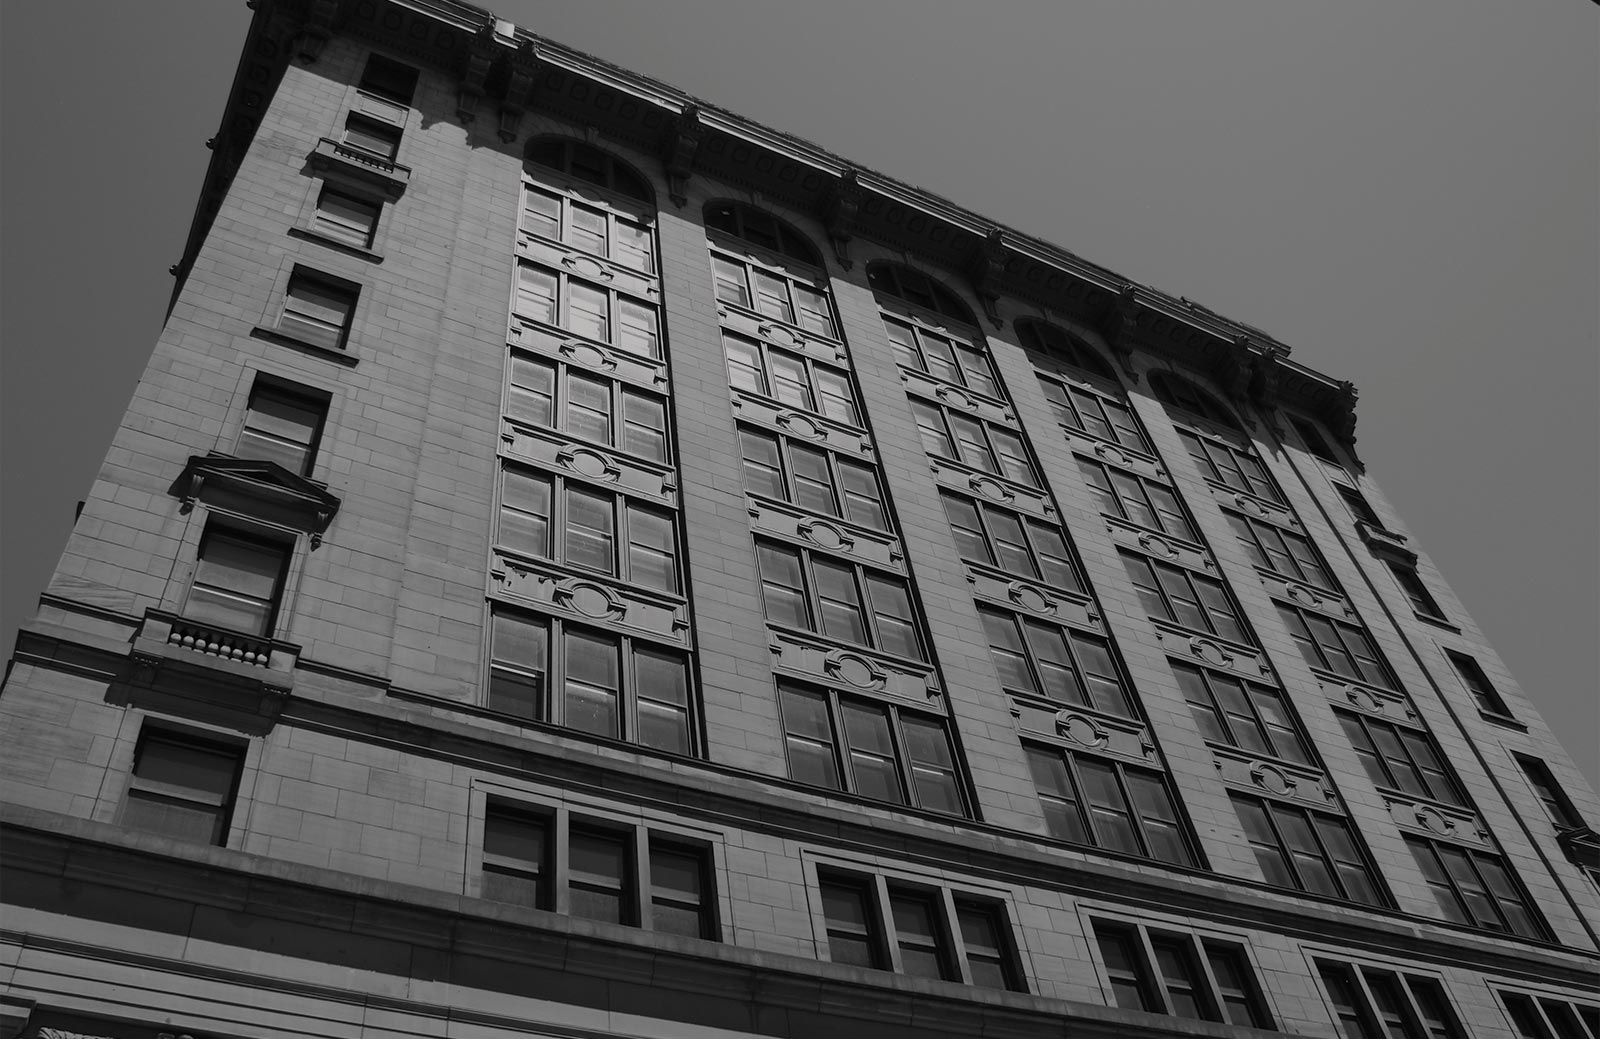 Black and white facade of building